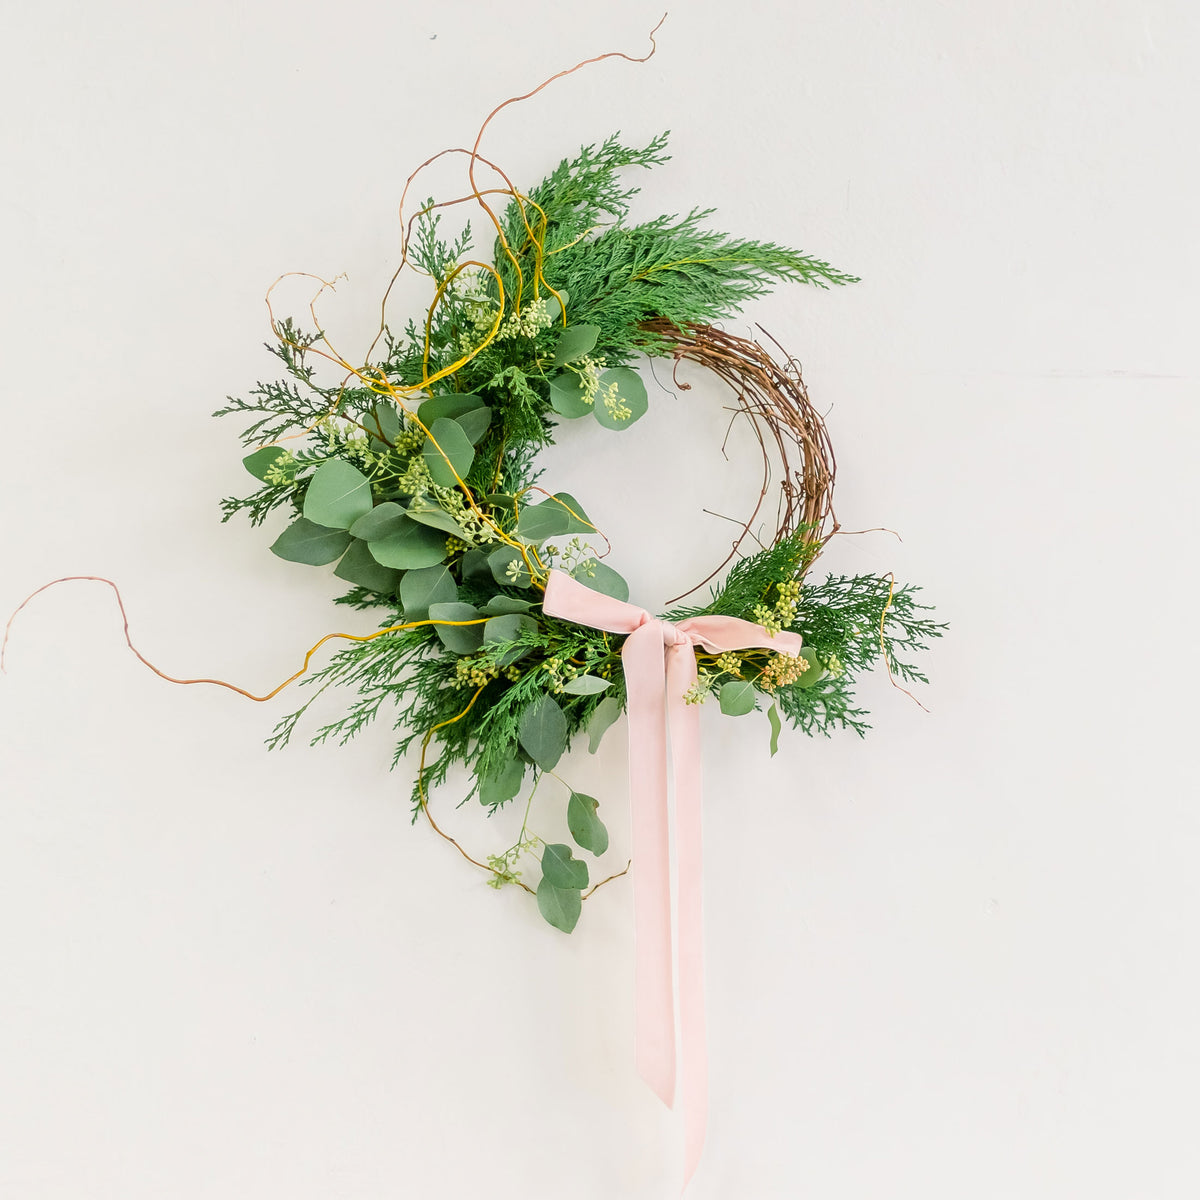 Biodegradable Floral Wreath – Native Poppy